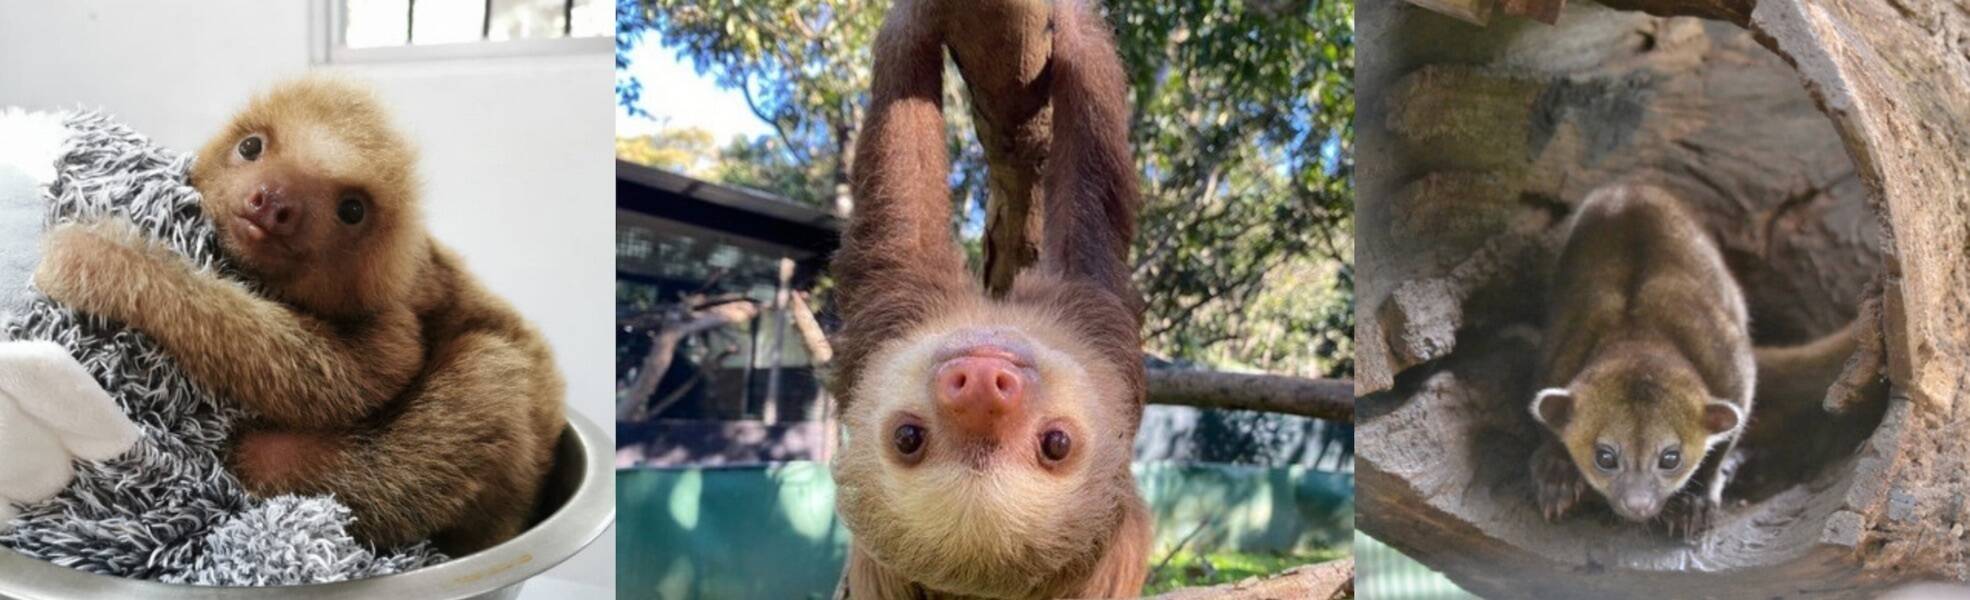 Animal sanctuary in Costa Rica with sloths